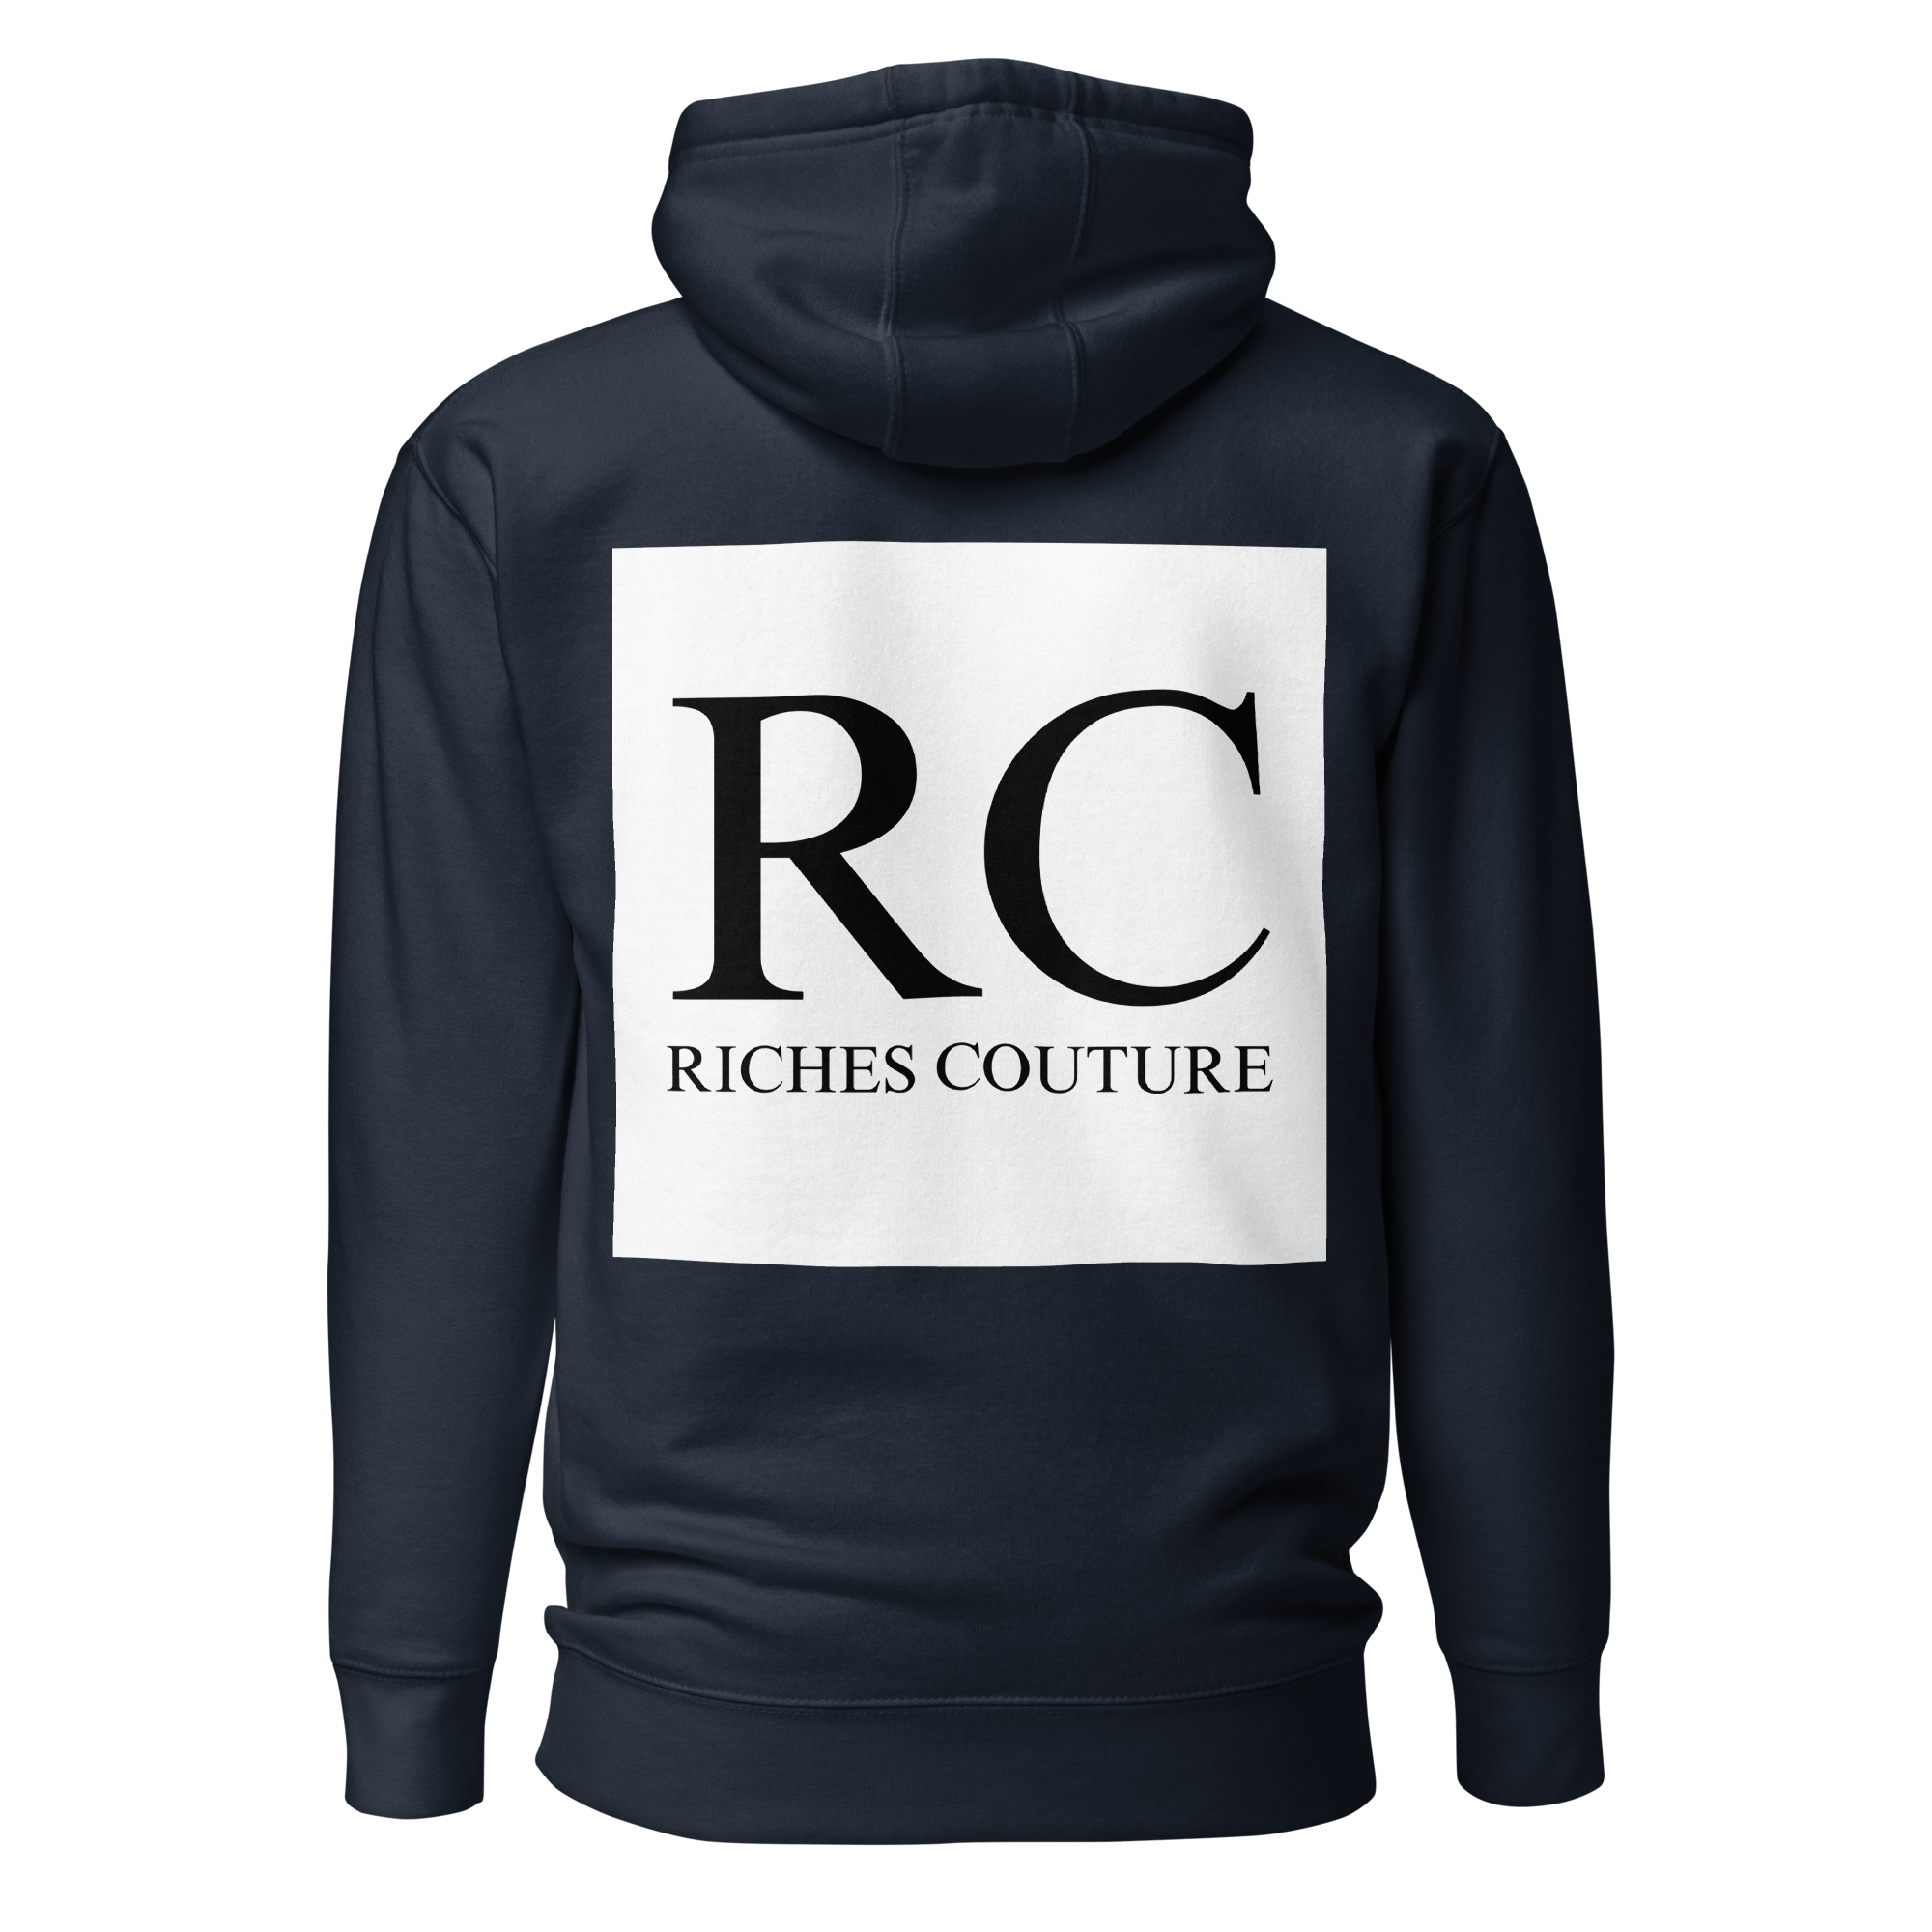 Riches Coutures Urban Comfort Men's Hoodie